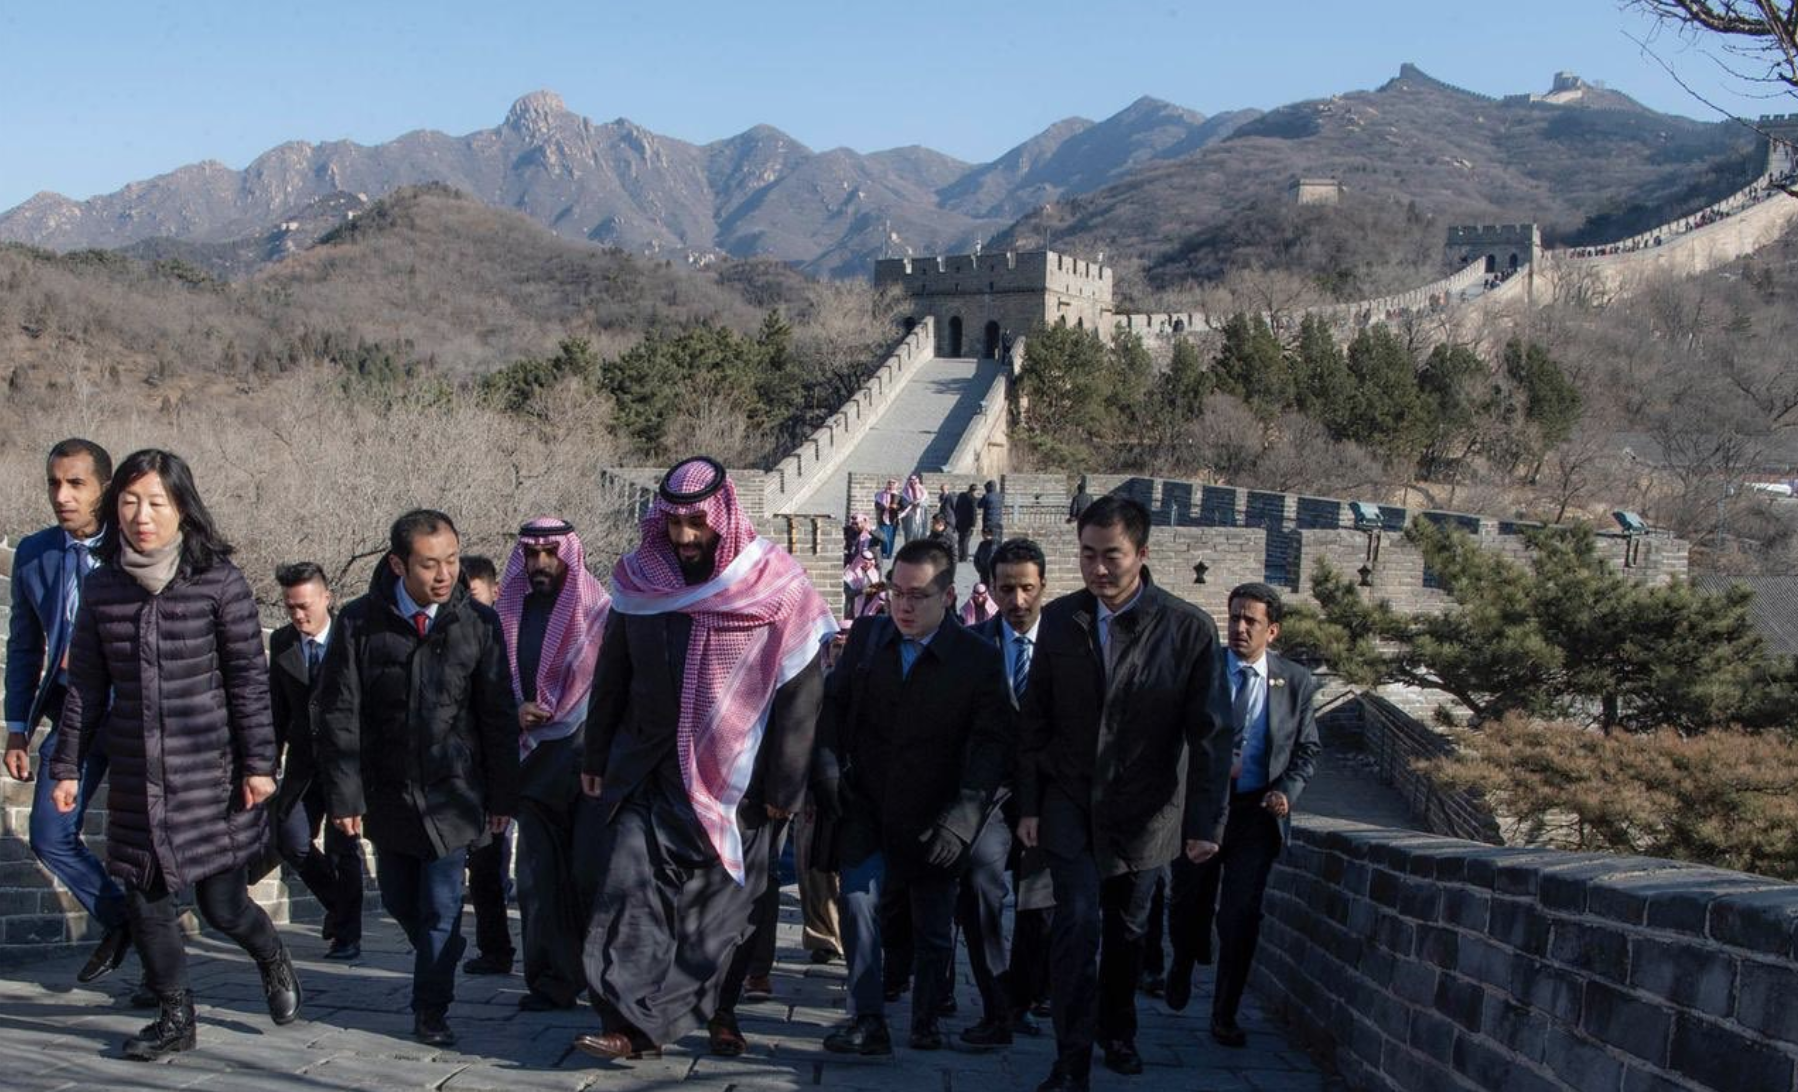 Crown Prince Mohammed bin Salman visits and tours the Great Wall of China.